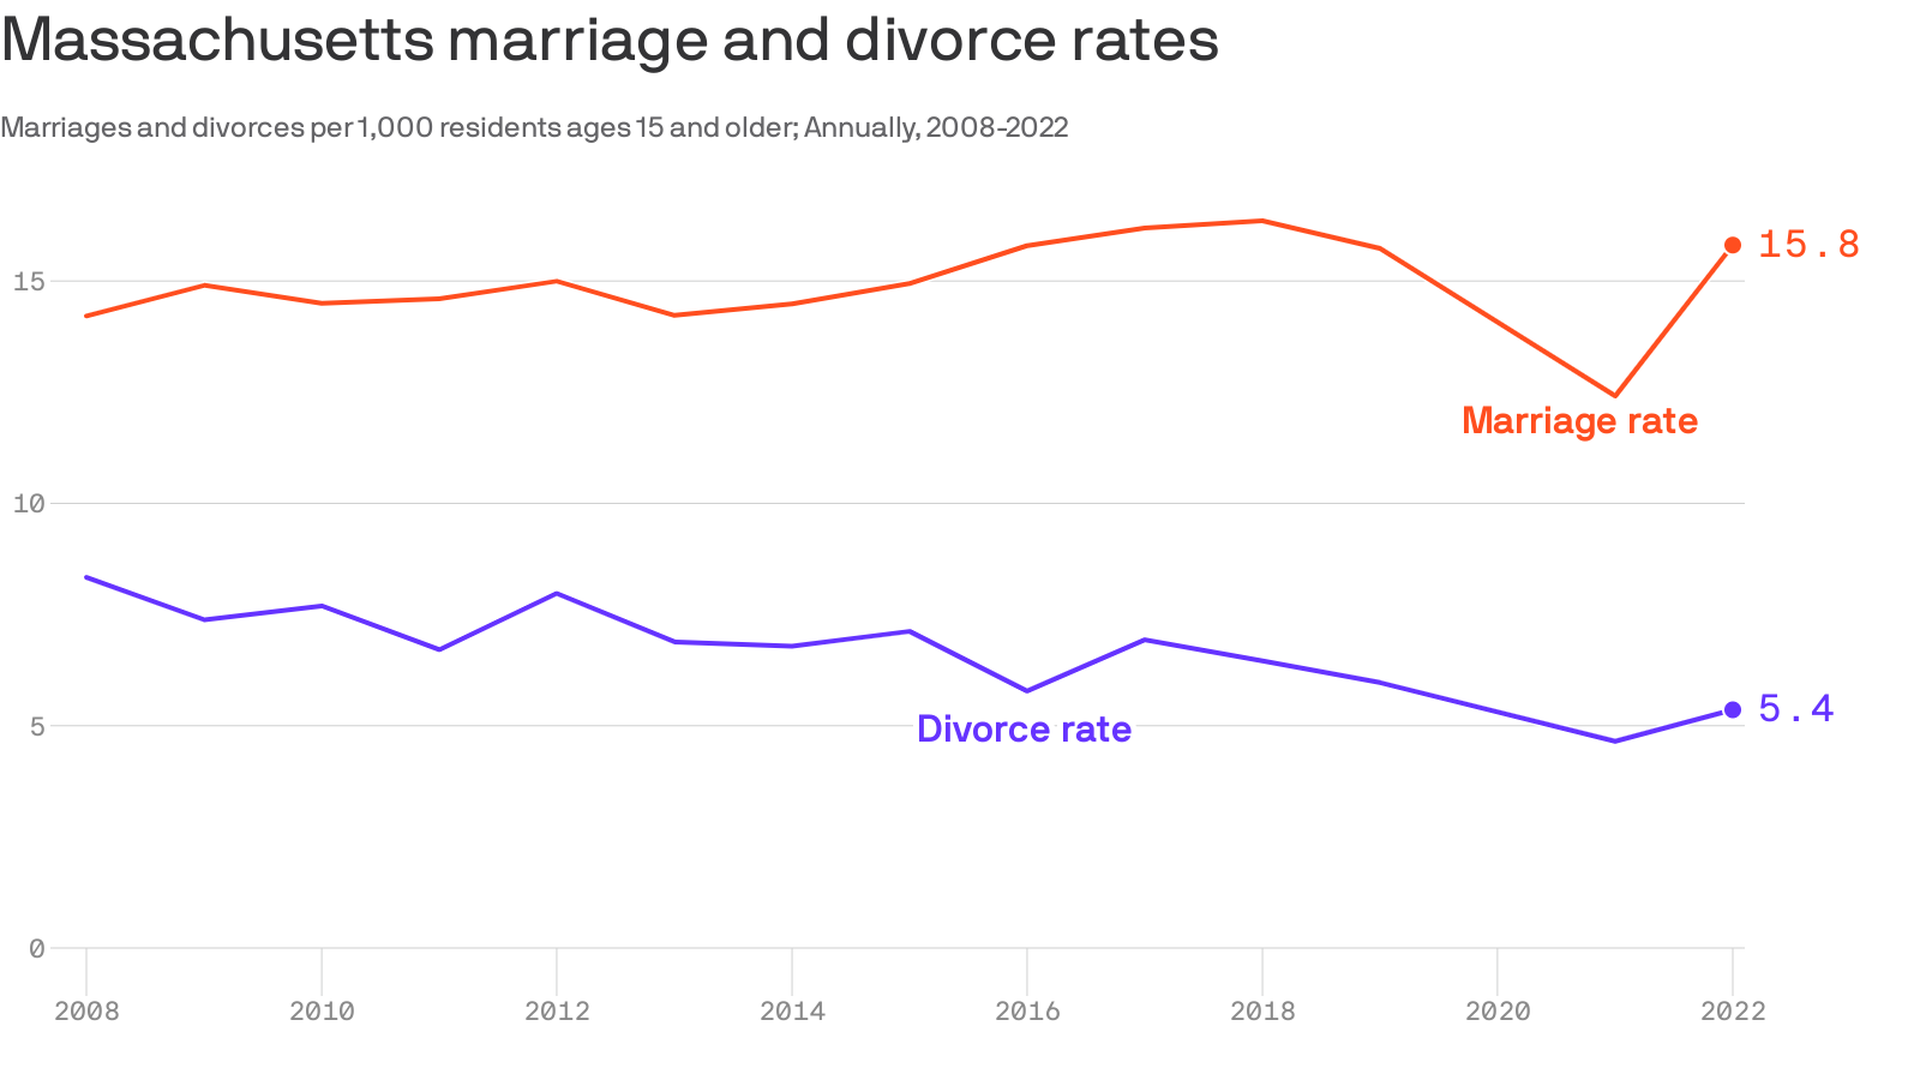 A line graph showing the marriage rate dipping and then increasing to 15.8/1,000 people in 2022, while the divorce rate shrinks to 5.4/1,000 people in Massachusetts.